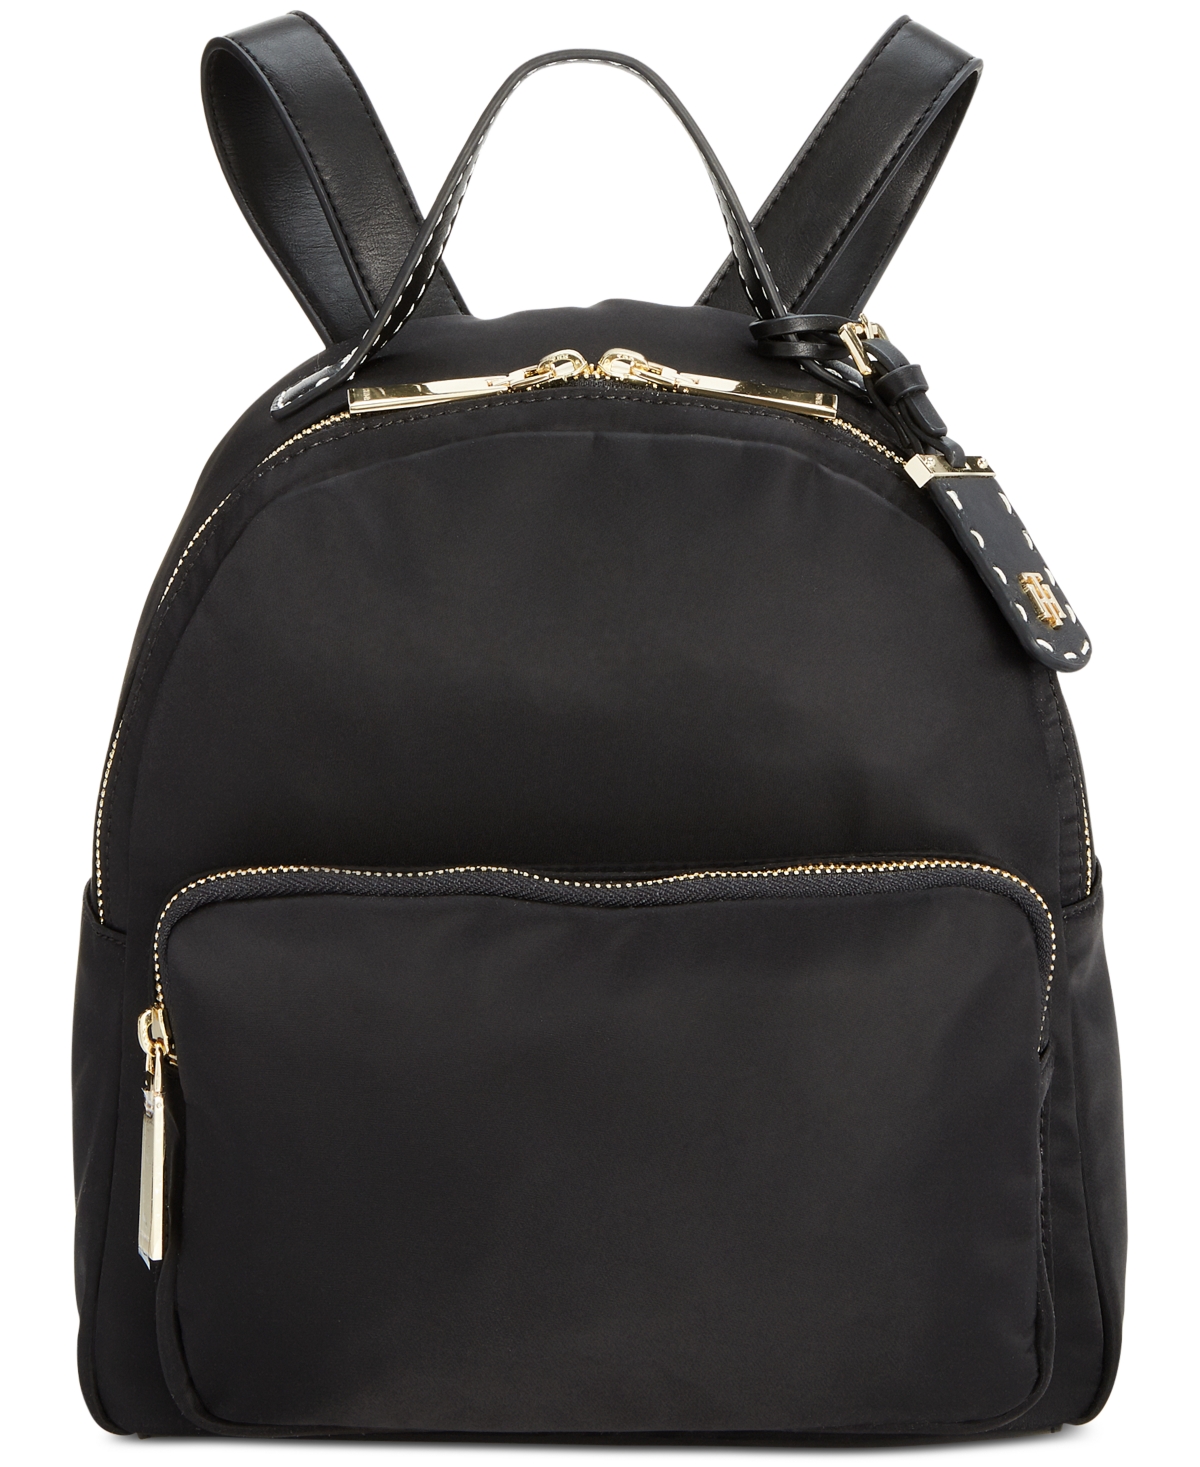 TOMMY HILFIGER JULIA SMALL DOME BACKPACK